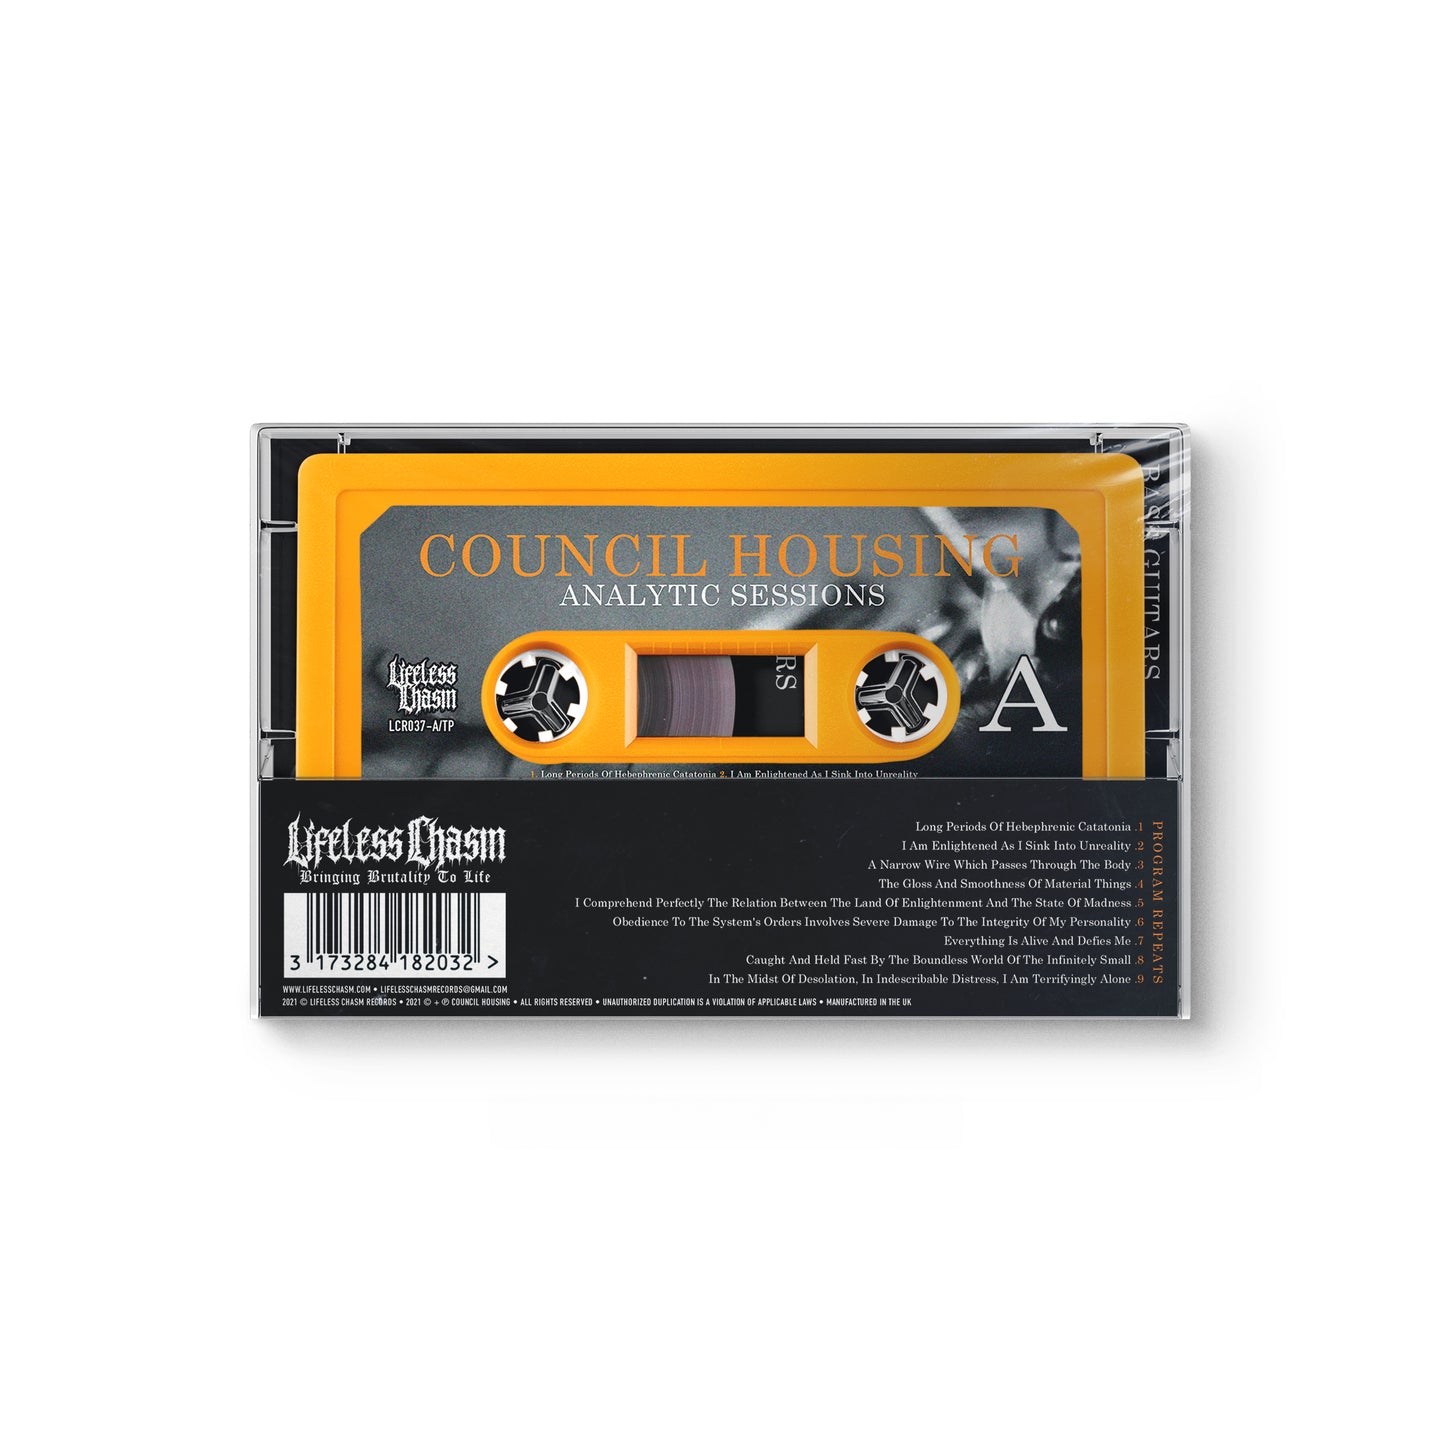 Council Housing "Analytic Sessions" CASSETTE